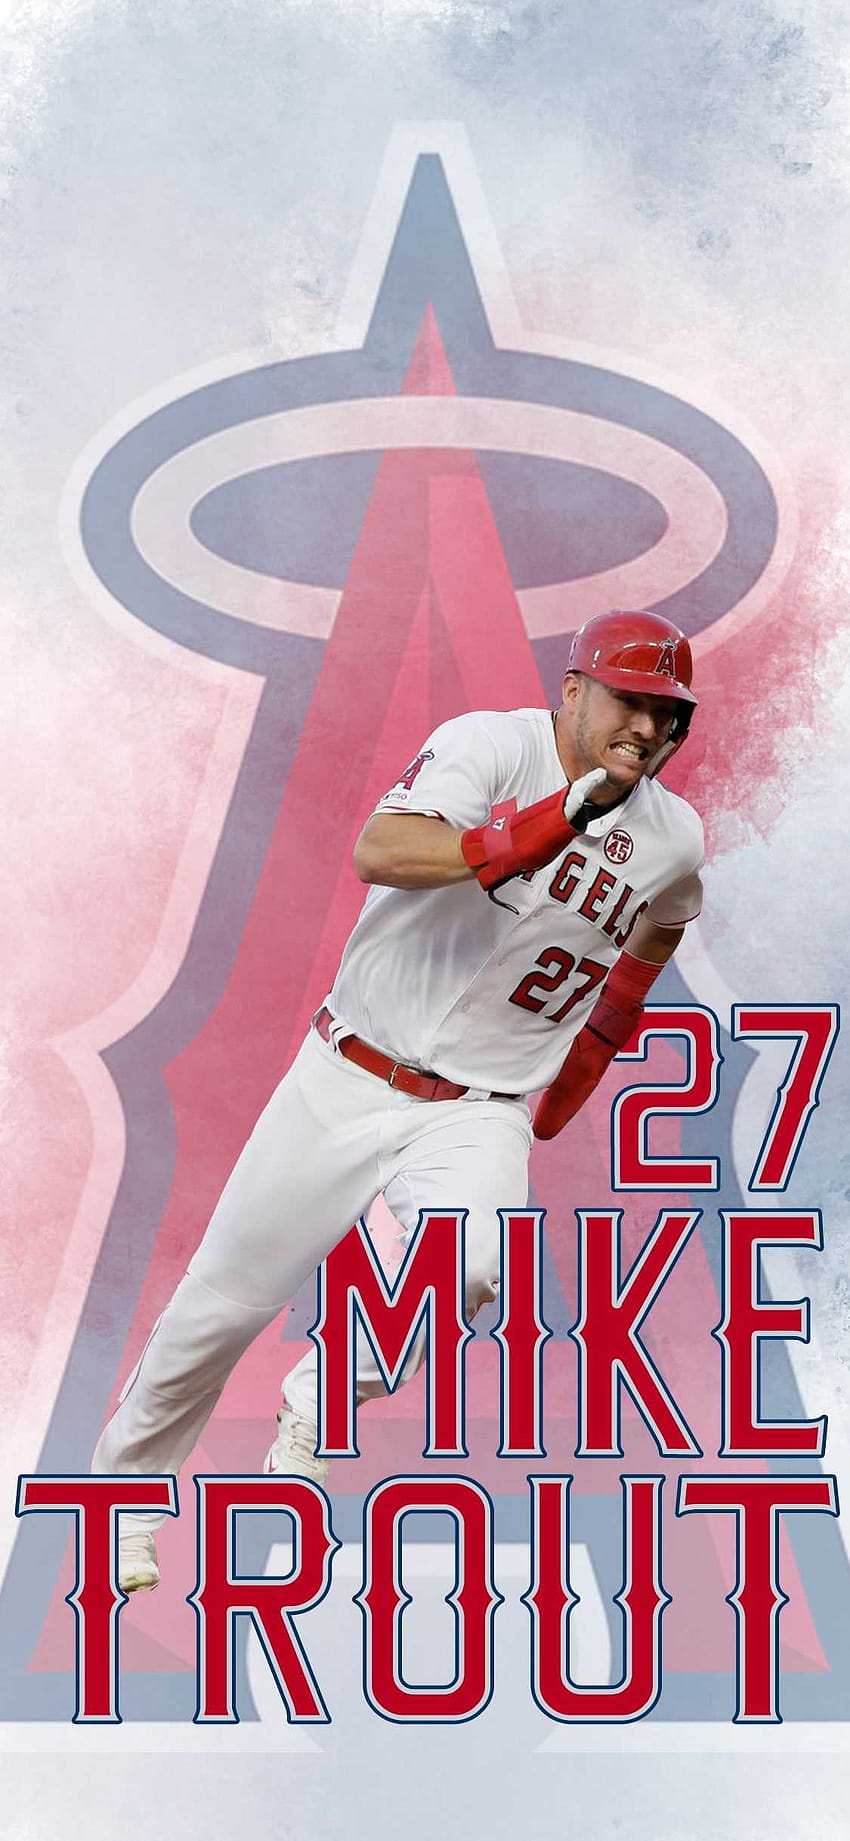 Mike Trout Iphone Wallpaper  Mlb wallpaper Mike trout Baseball wallpaper